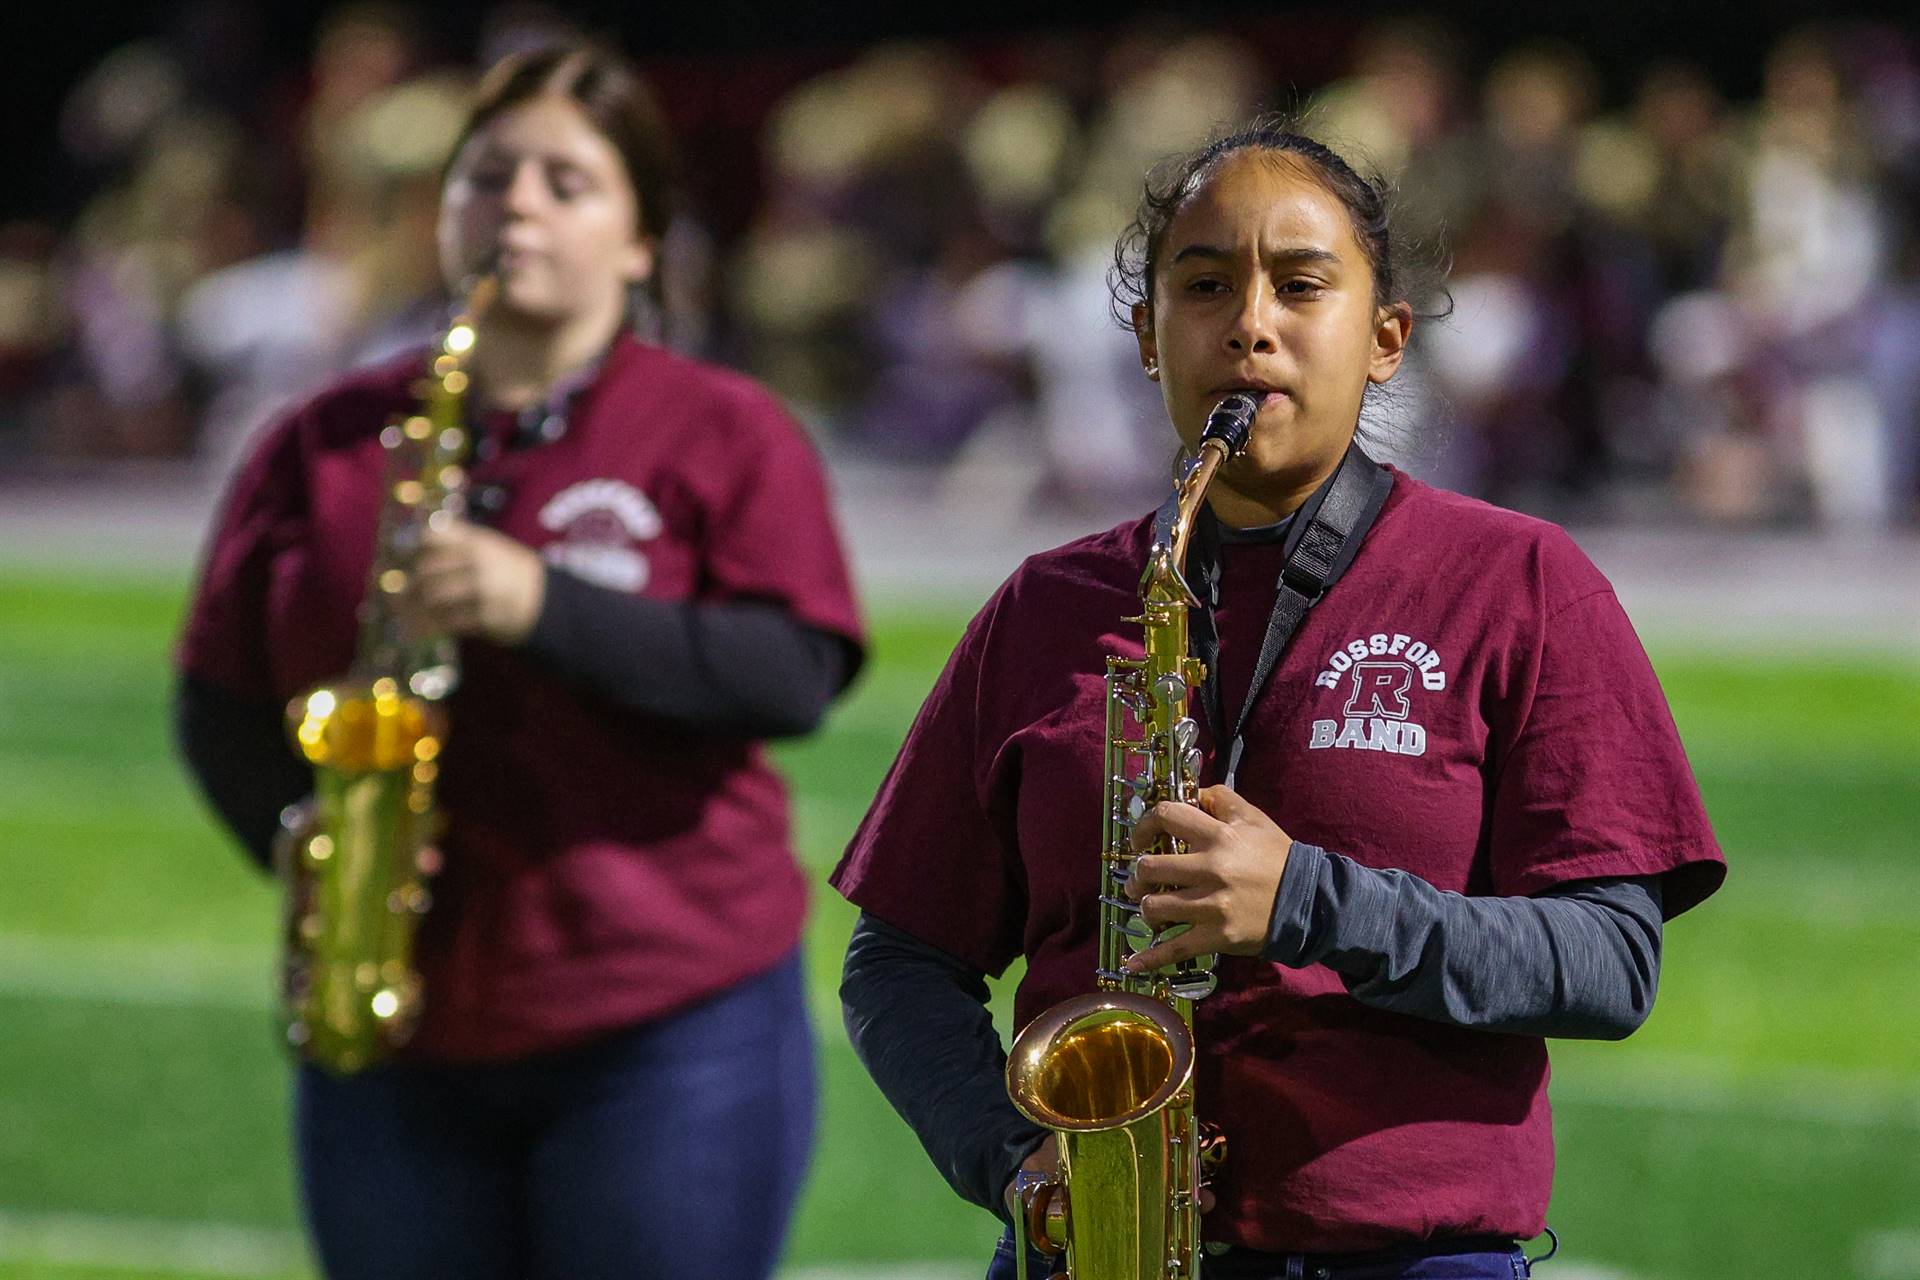 Photo of Rossford Band performance at halftime.